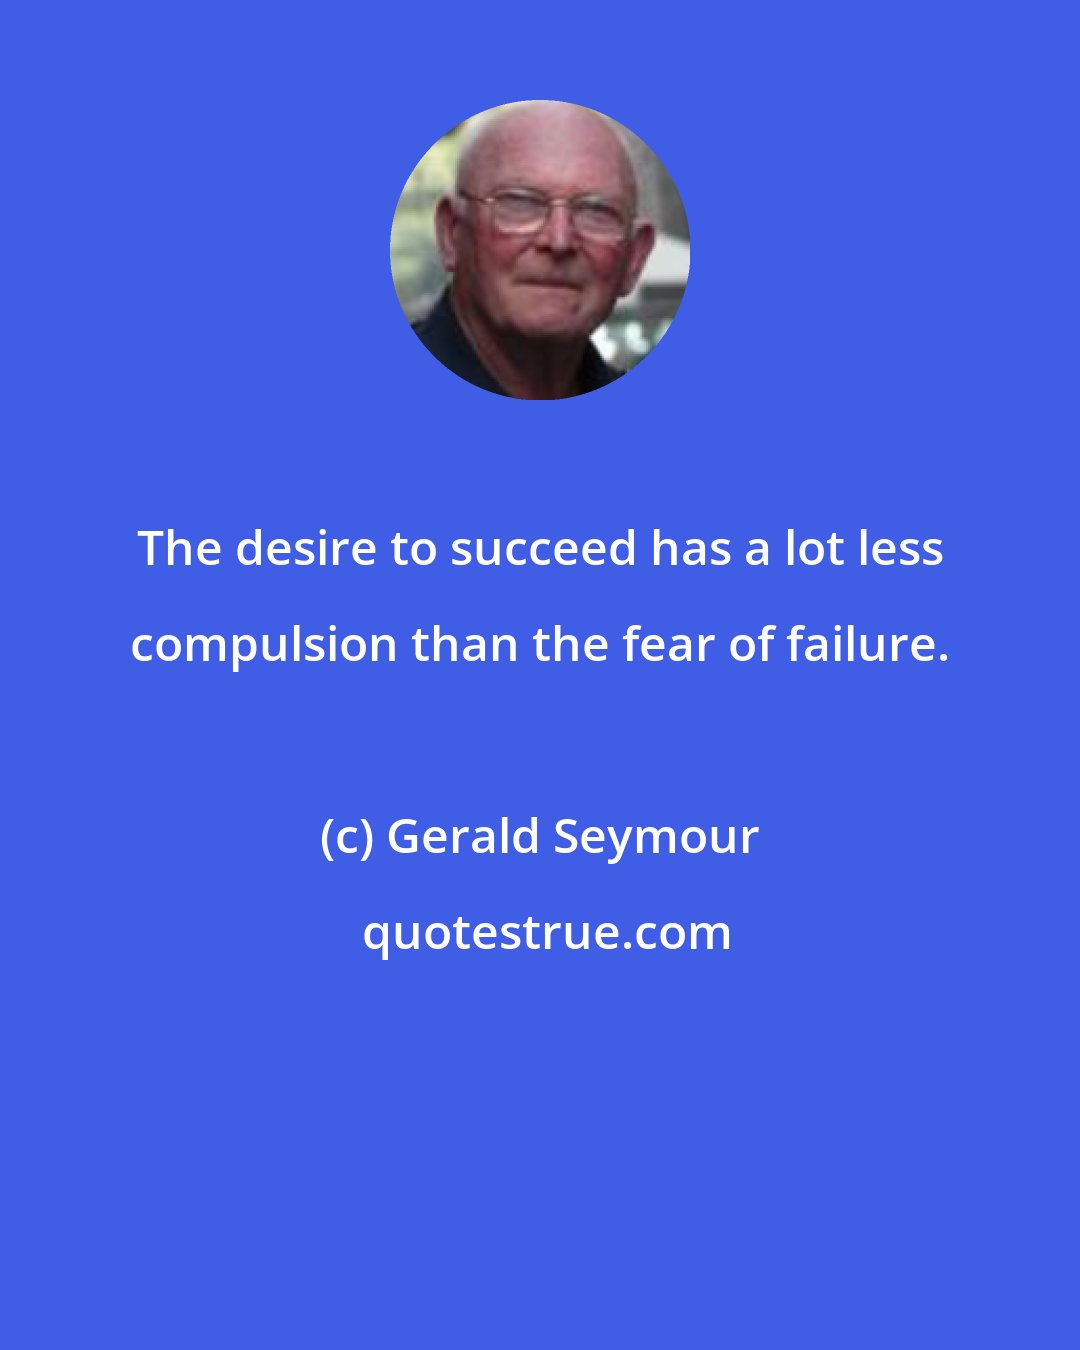 Gerald Seymour: The desire to succeed has a lot less compulsion than the fear of failure.